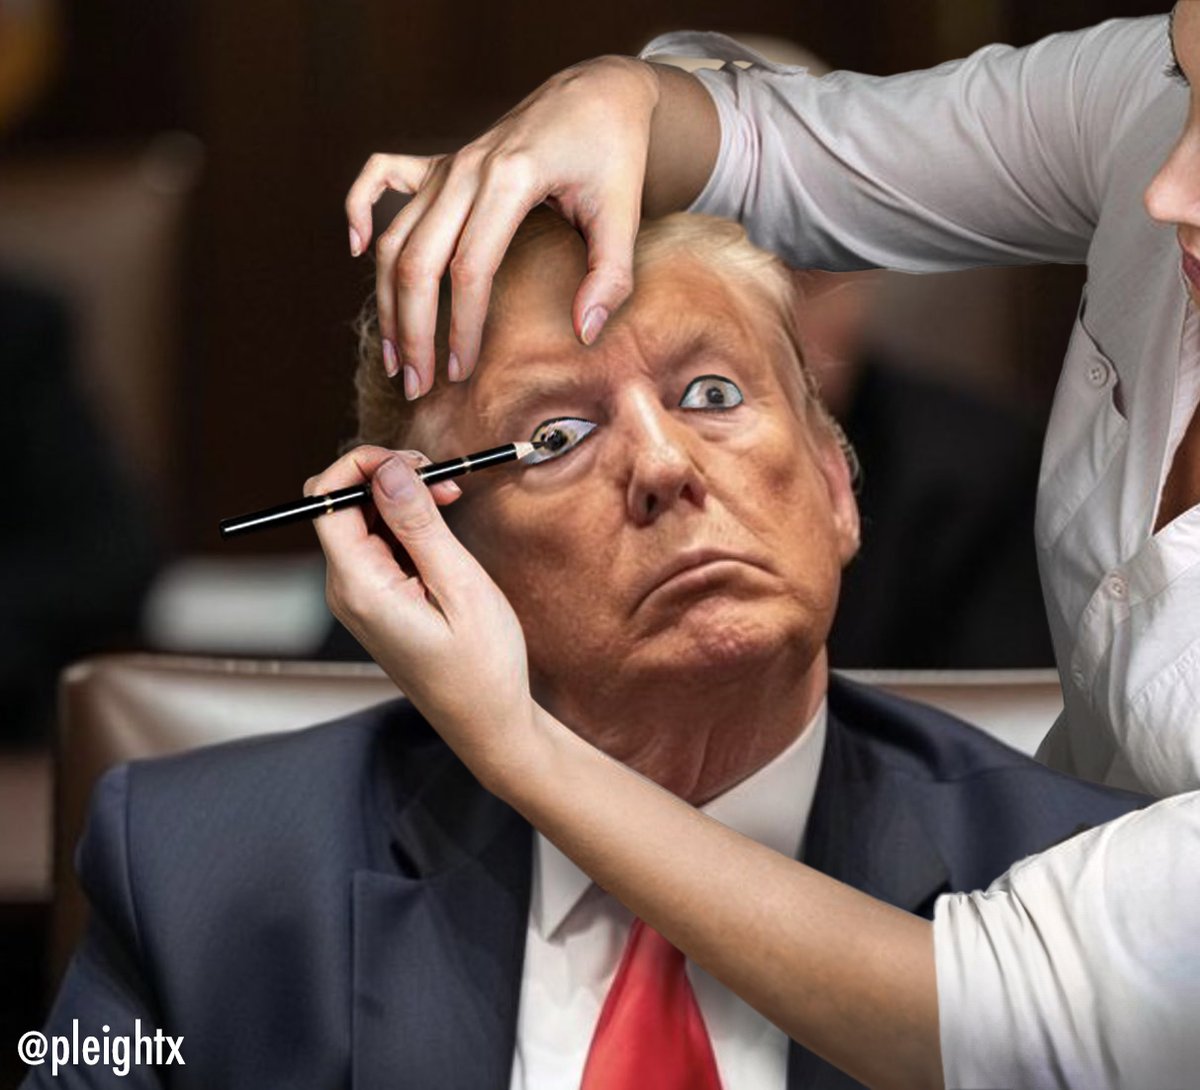 So that he won't be humiliated again for nodding off, Trump hired himself a special makeup artist.